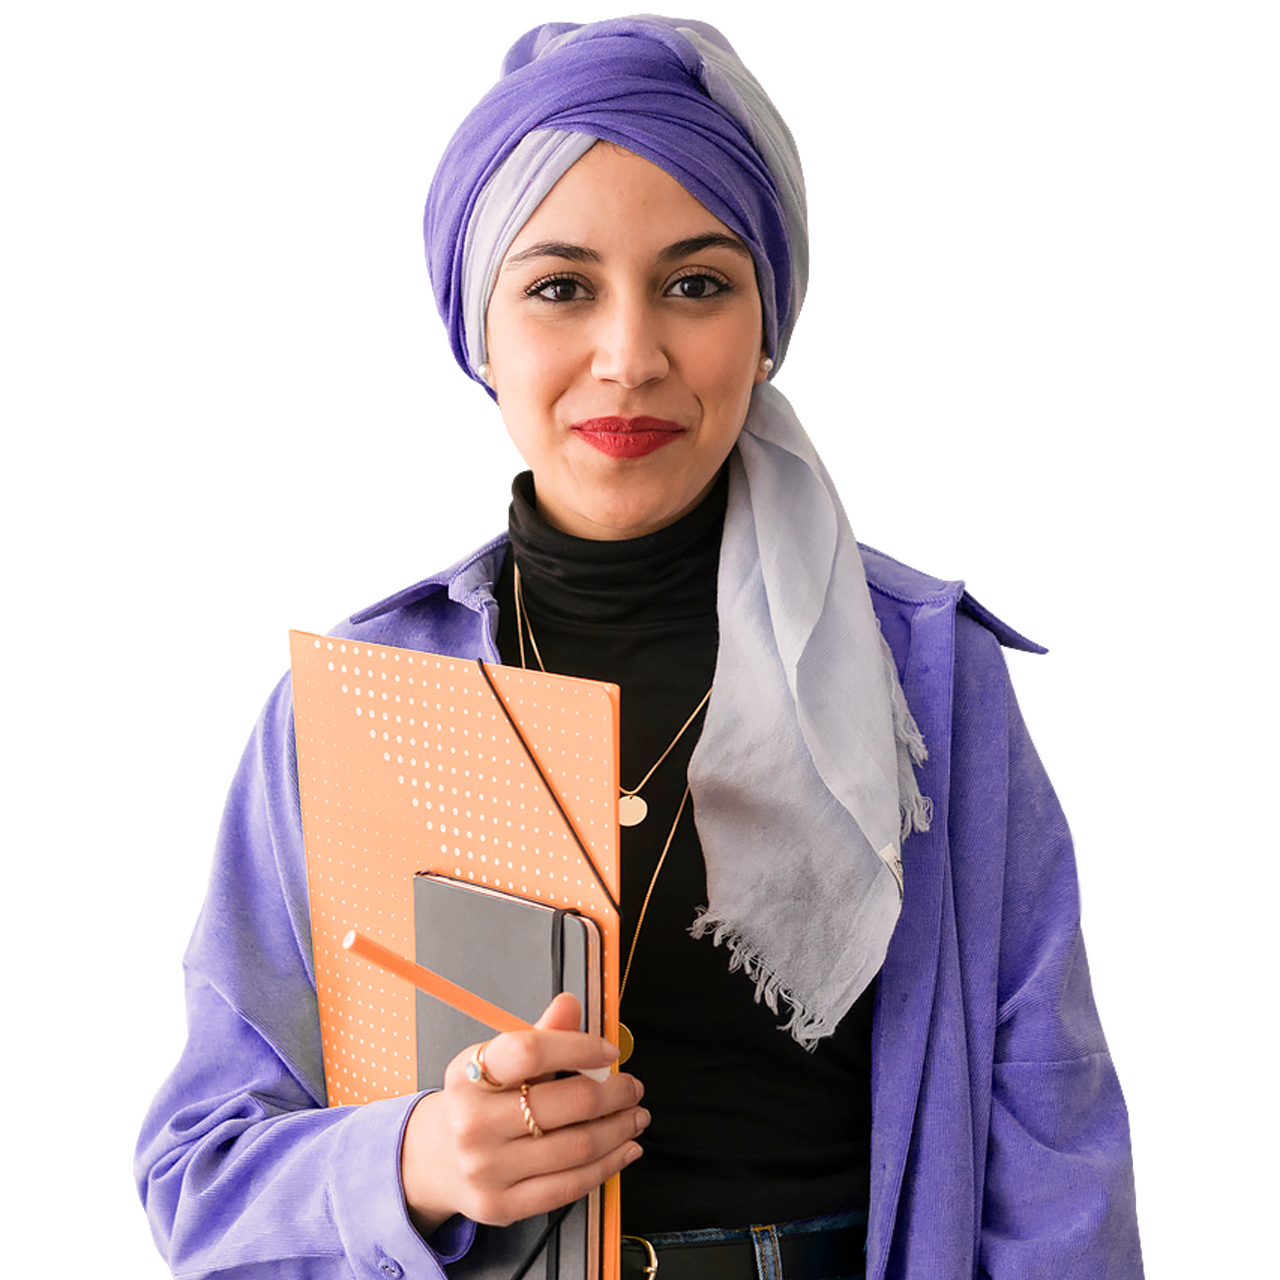 Smiling woman wearing headwrap holding a pencil and notebook